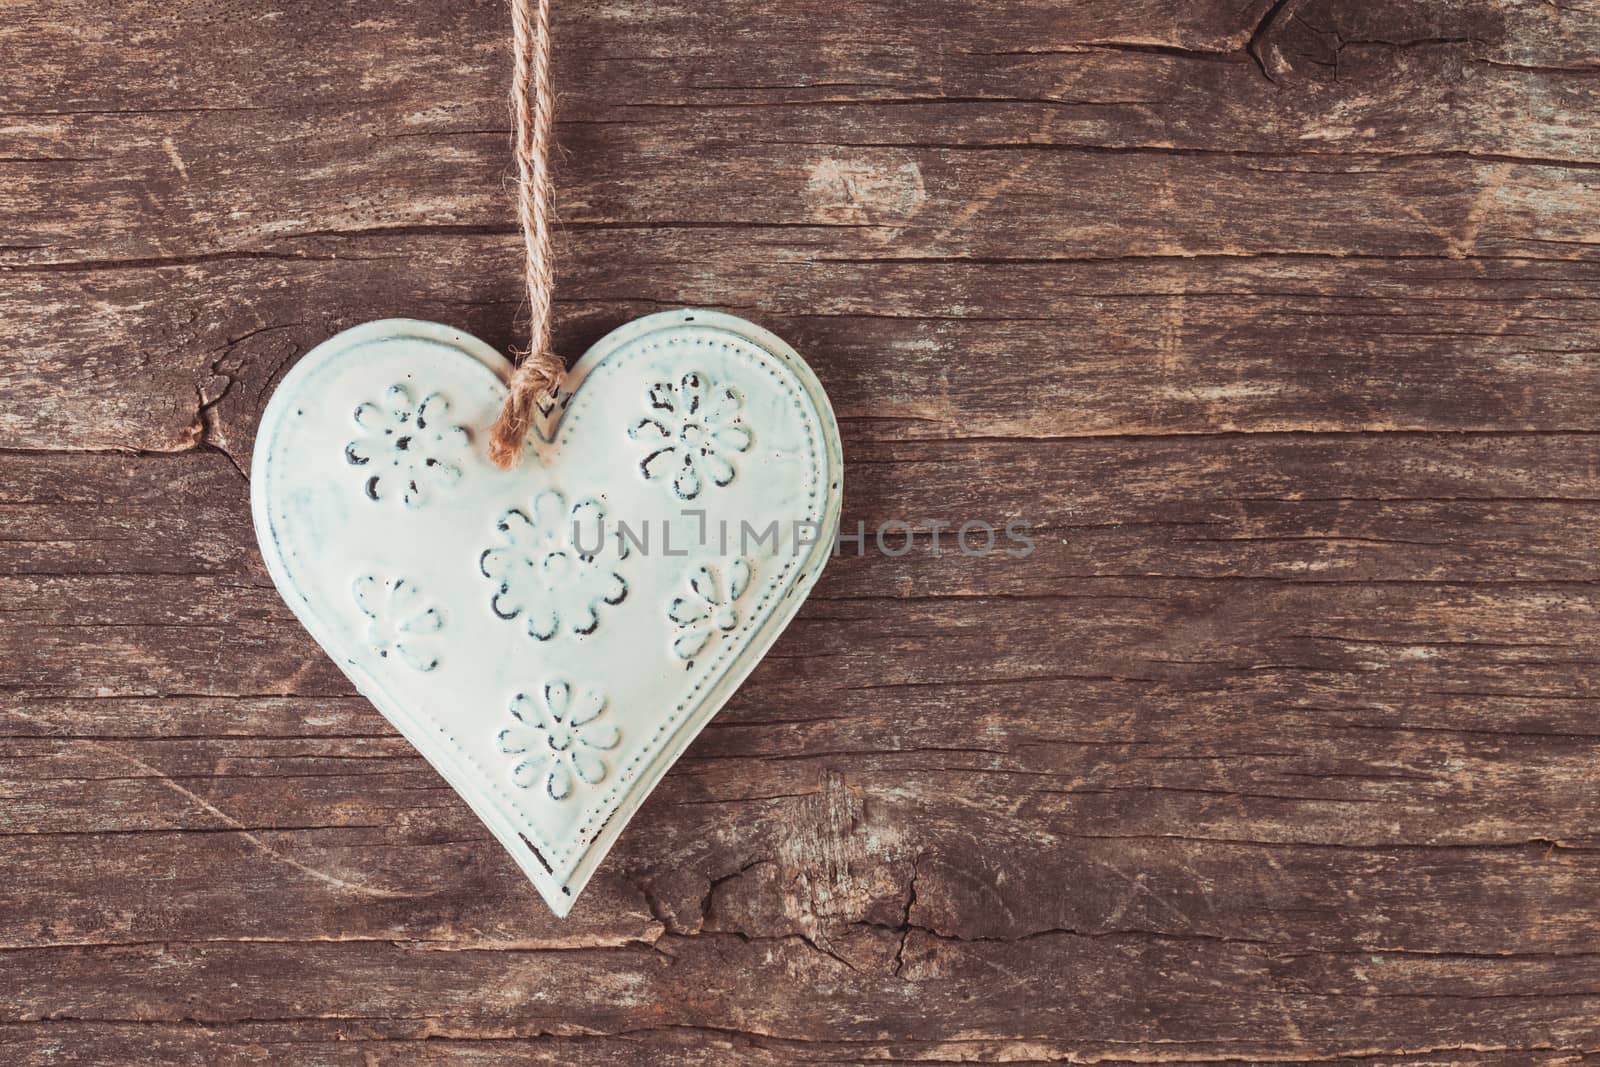 Metal heart on the old wooden background